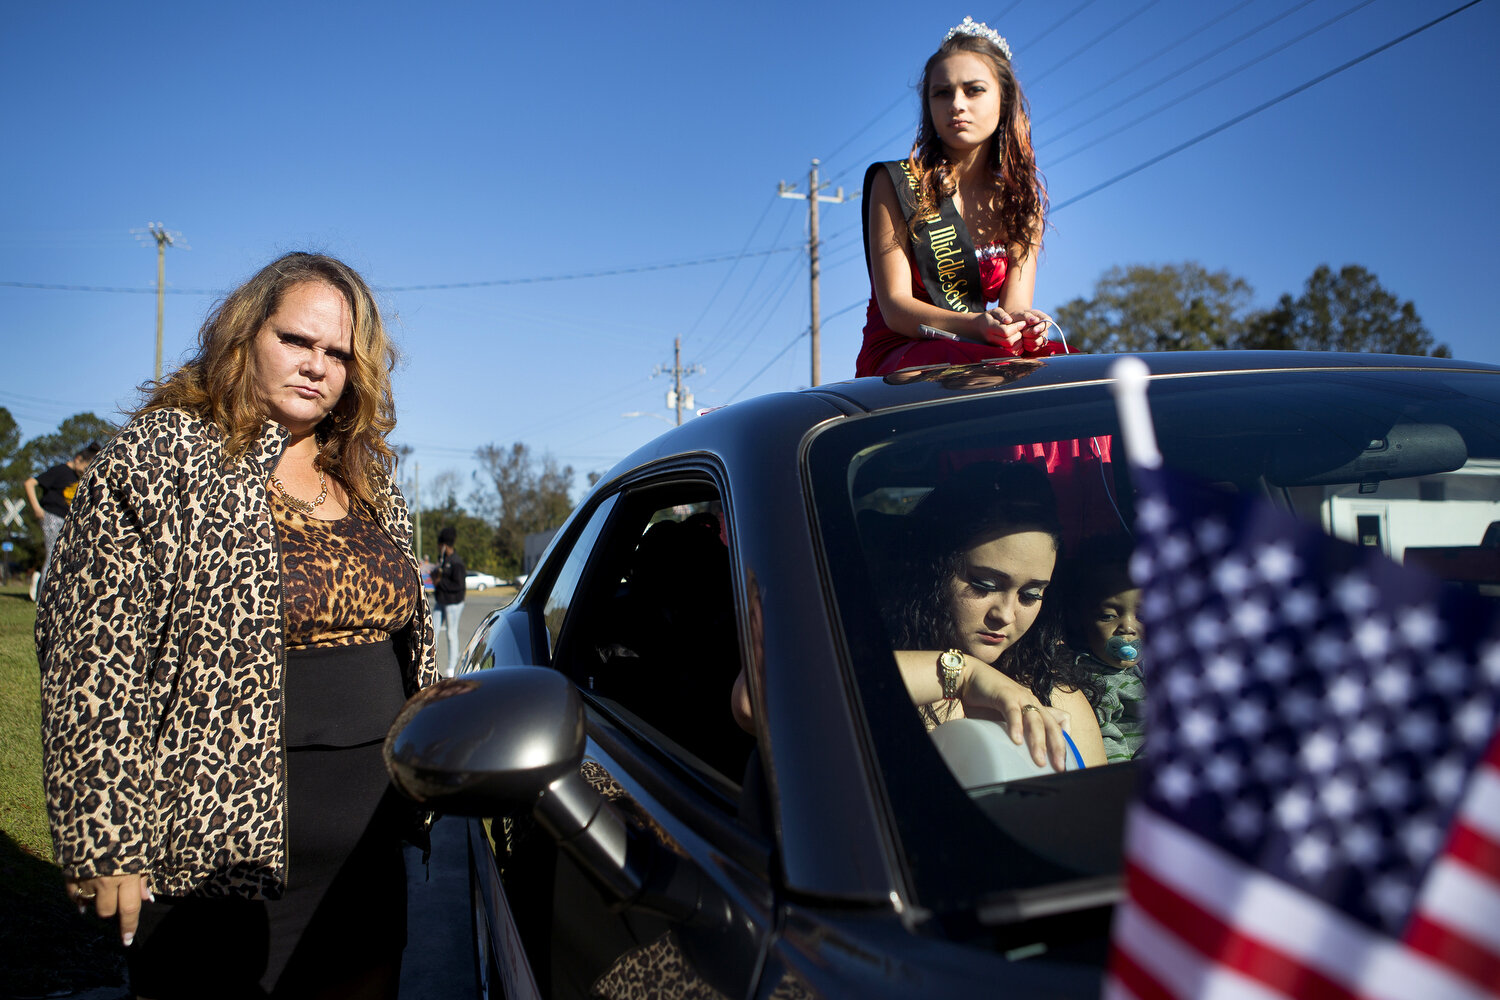  Miss Warsaw Middle School Zequoia Sanderson sits on top of a car for the 96th annual Warsaw Veterans Day parade as her mom Cathy Barden, left, and Zena Bell, in the car, prepare to ride in the parade as well. 